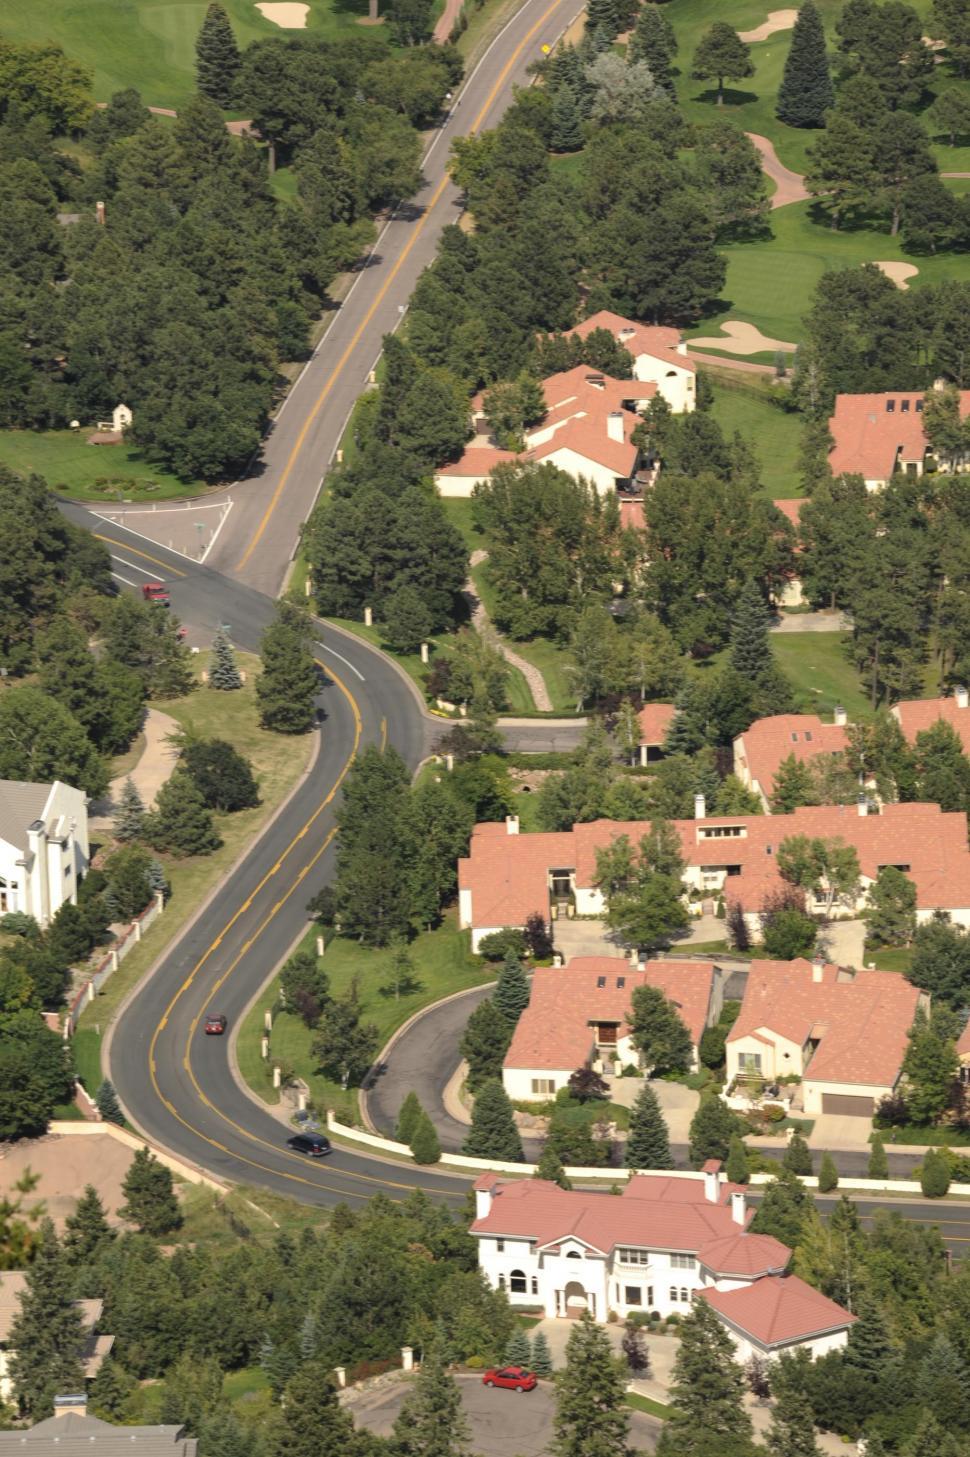 Free Image of Residential Area with road 